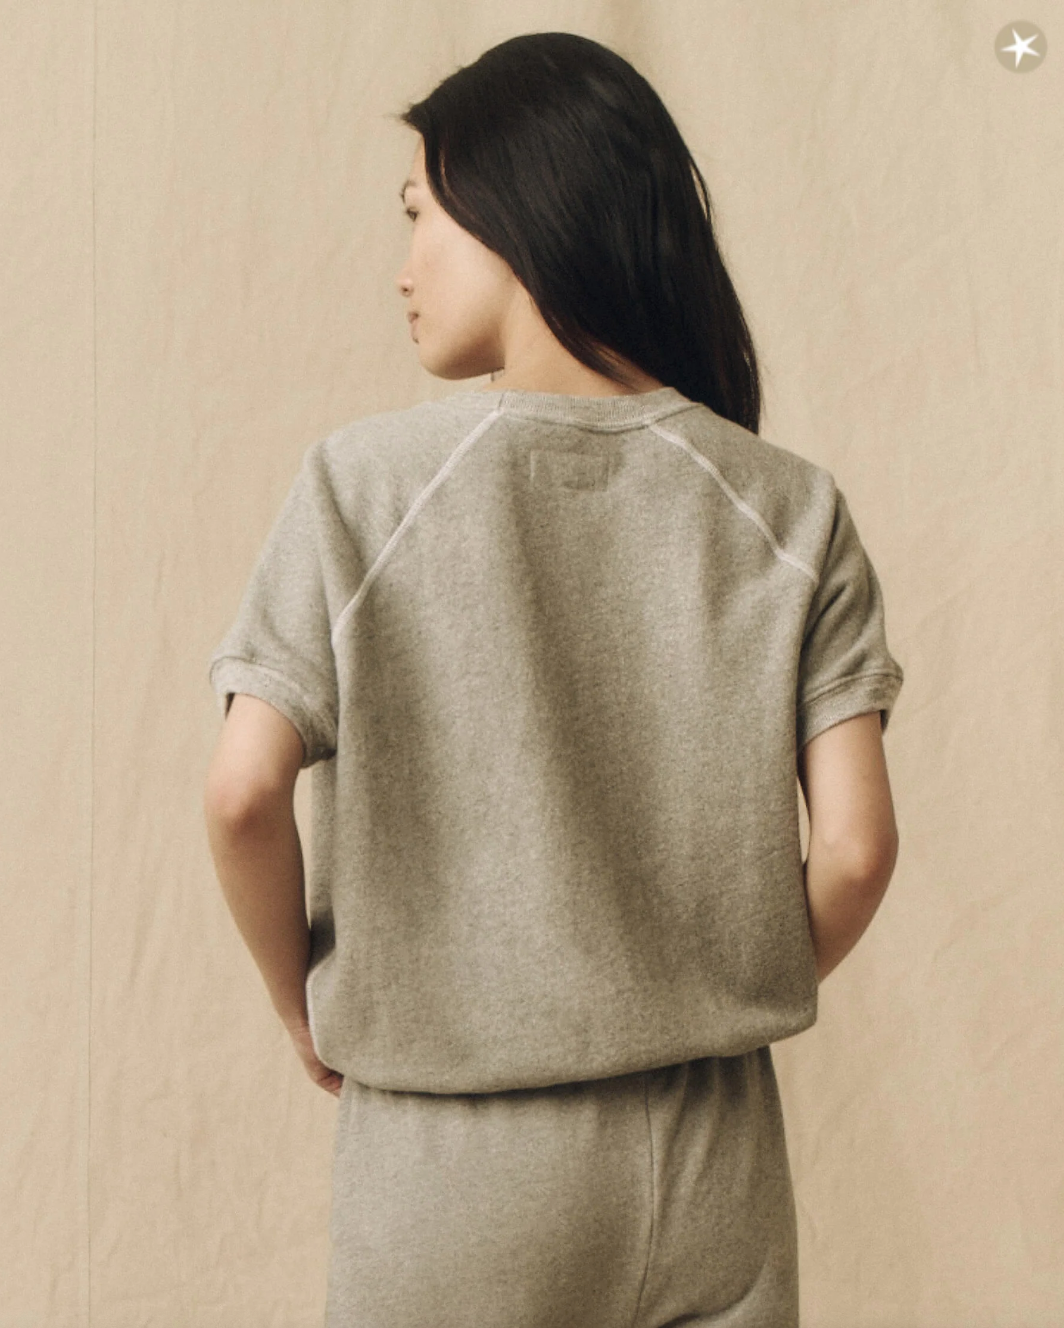 A woman with long black hair wearing The Short Sleeve Sweatshirt Varsity Grey from The Great Inc., seen from behind, against a beige background in Scottsdale Arizona.